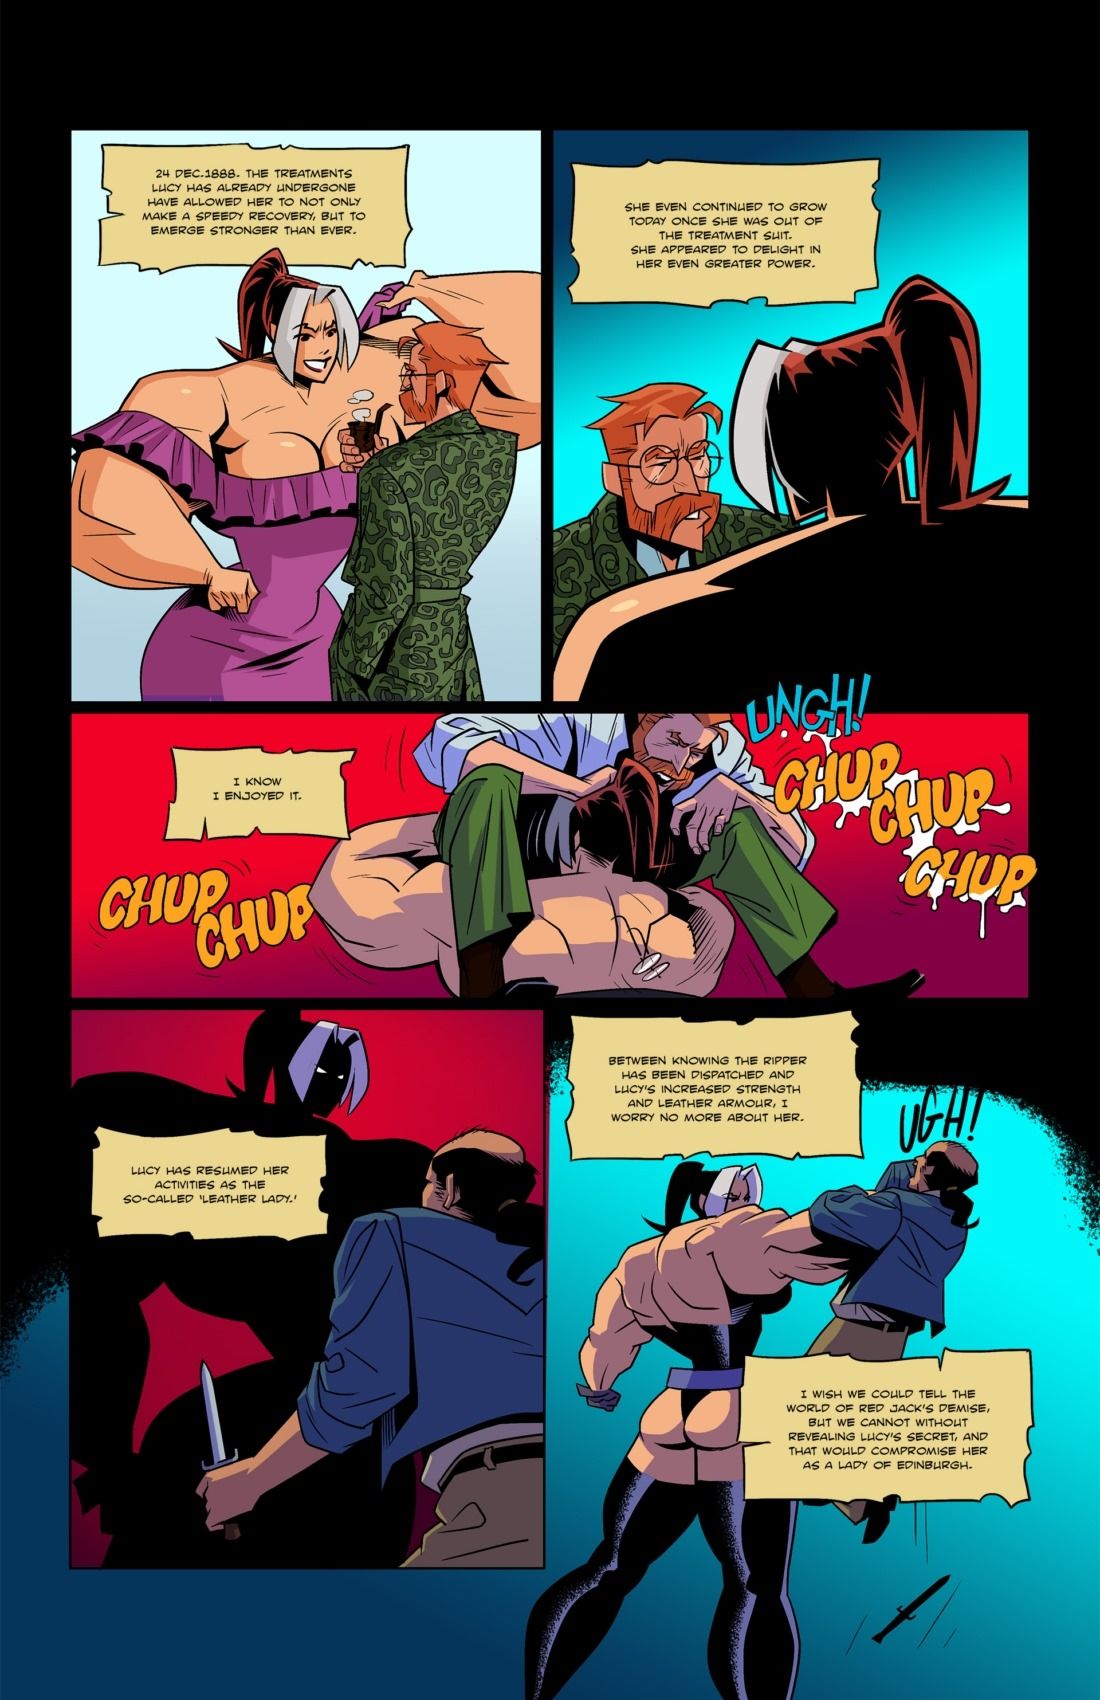 Steampumped Issue 2 by Amblagar (MuscleFan) page 16